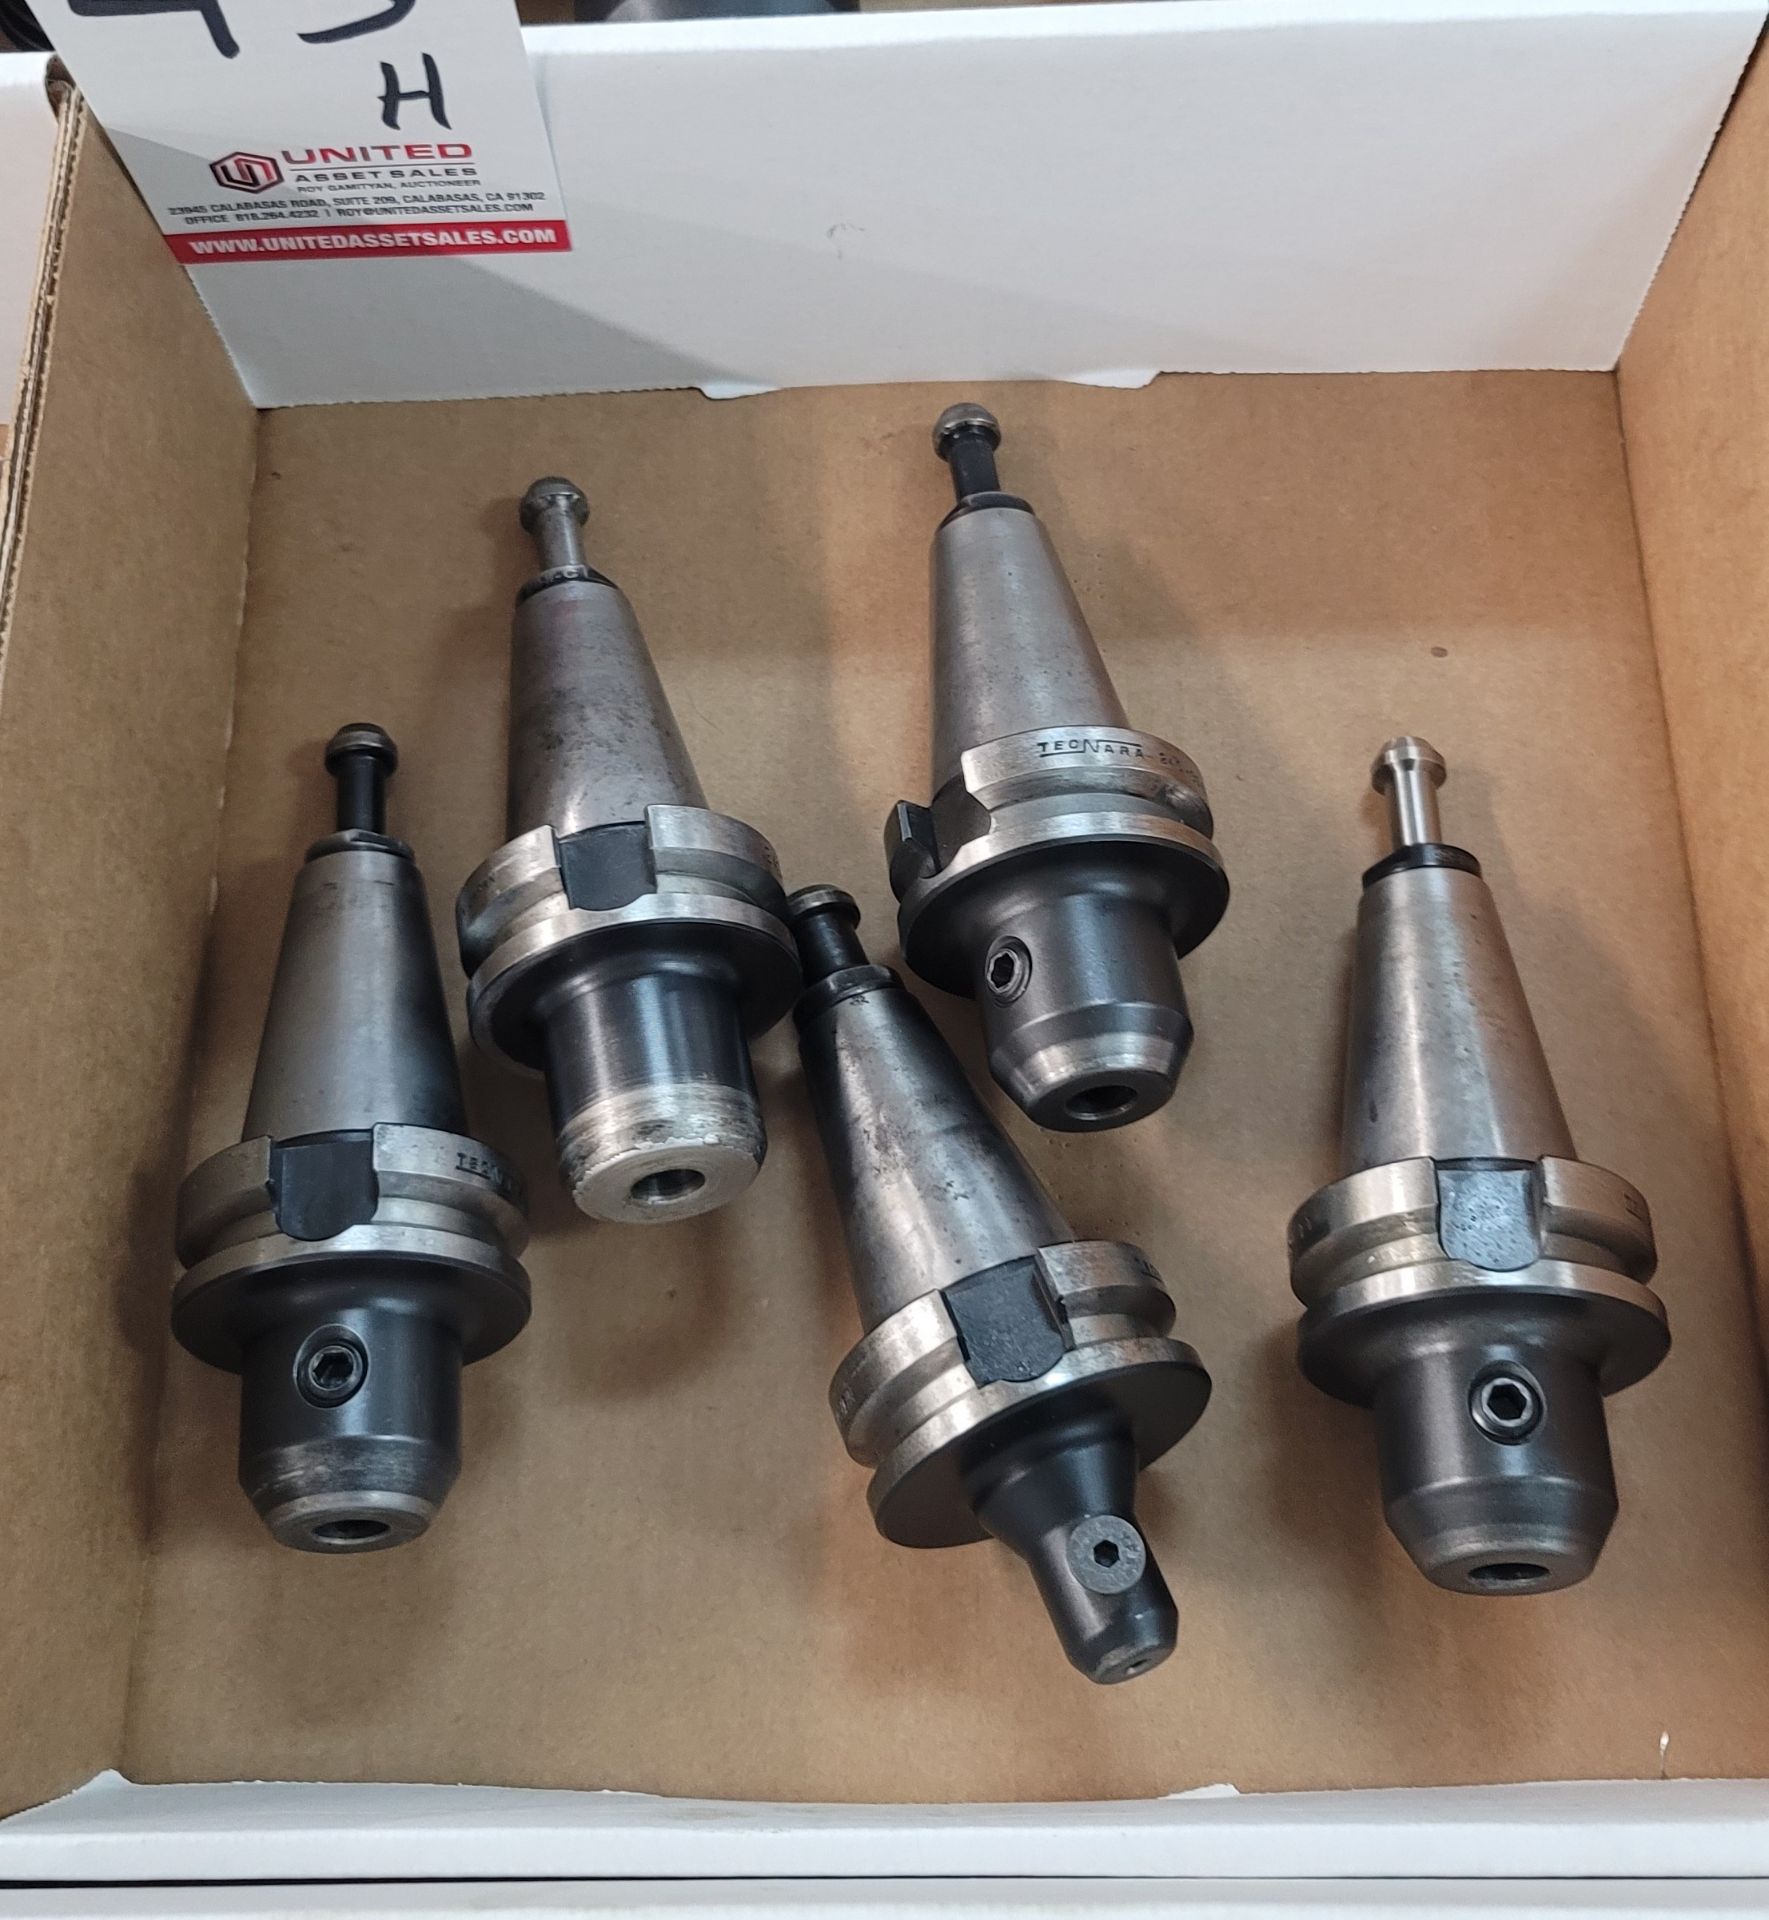 LOT - (5) BT-40 TOOL HOLDERS: (4) 1/2" SOLID AND (1) 3/4" SOLID, **IMMEX REGISTERED EQUIPMENT (NEEDS